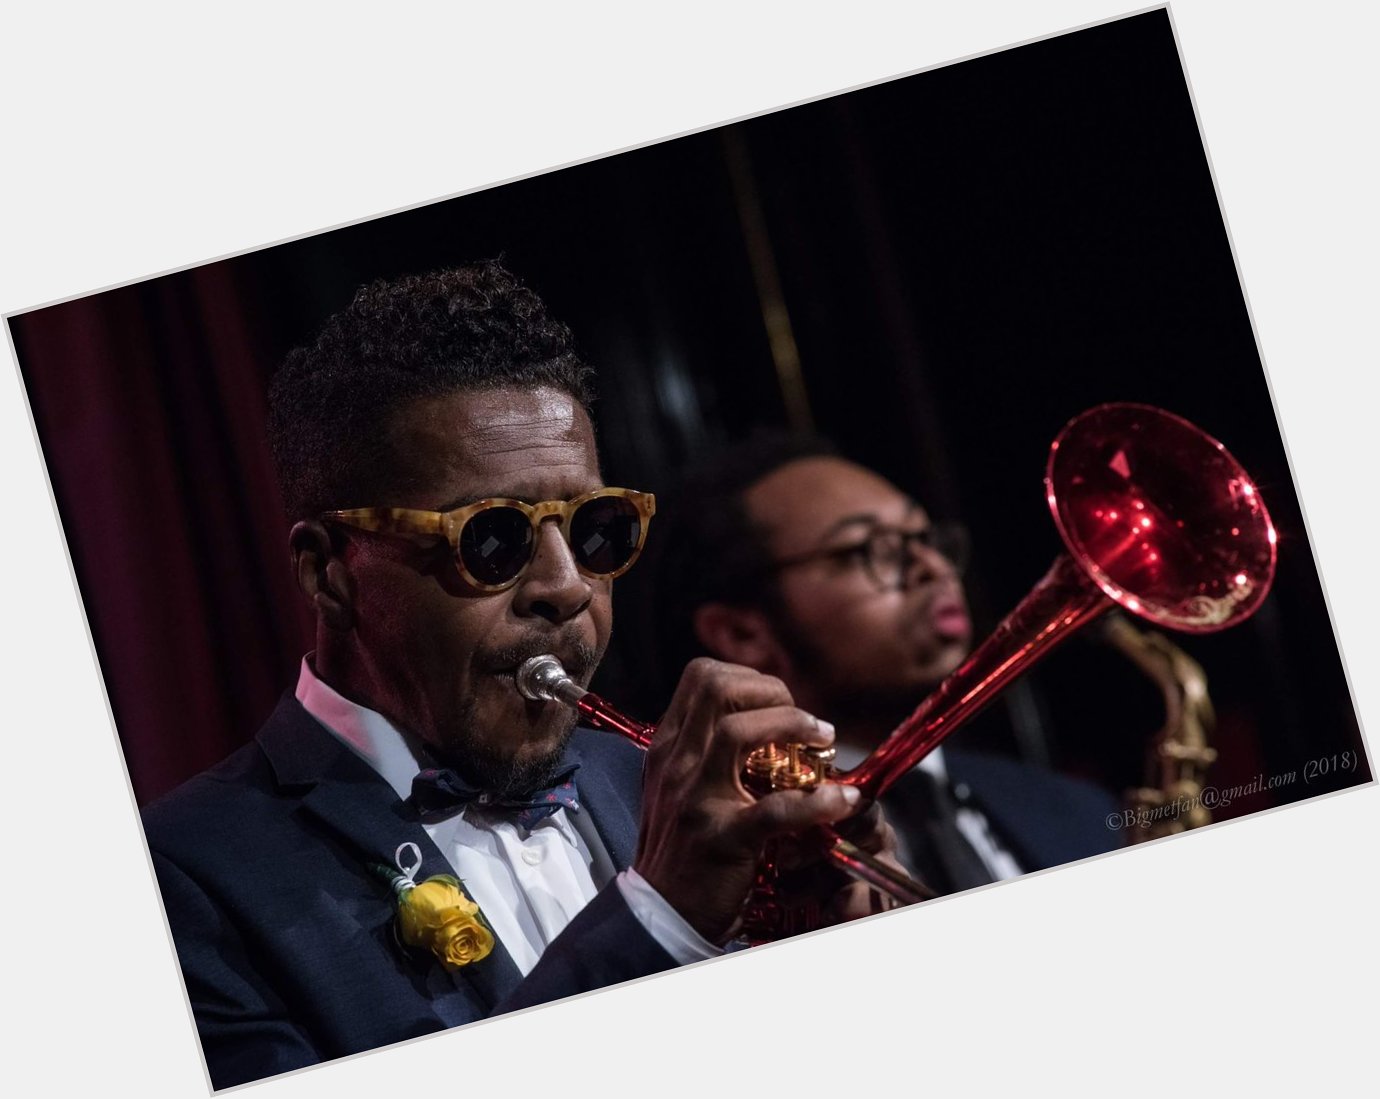 16/10.
Happy Birthday to one of my favorite Trumpeter\s Roy Hargrove!!   